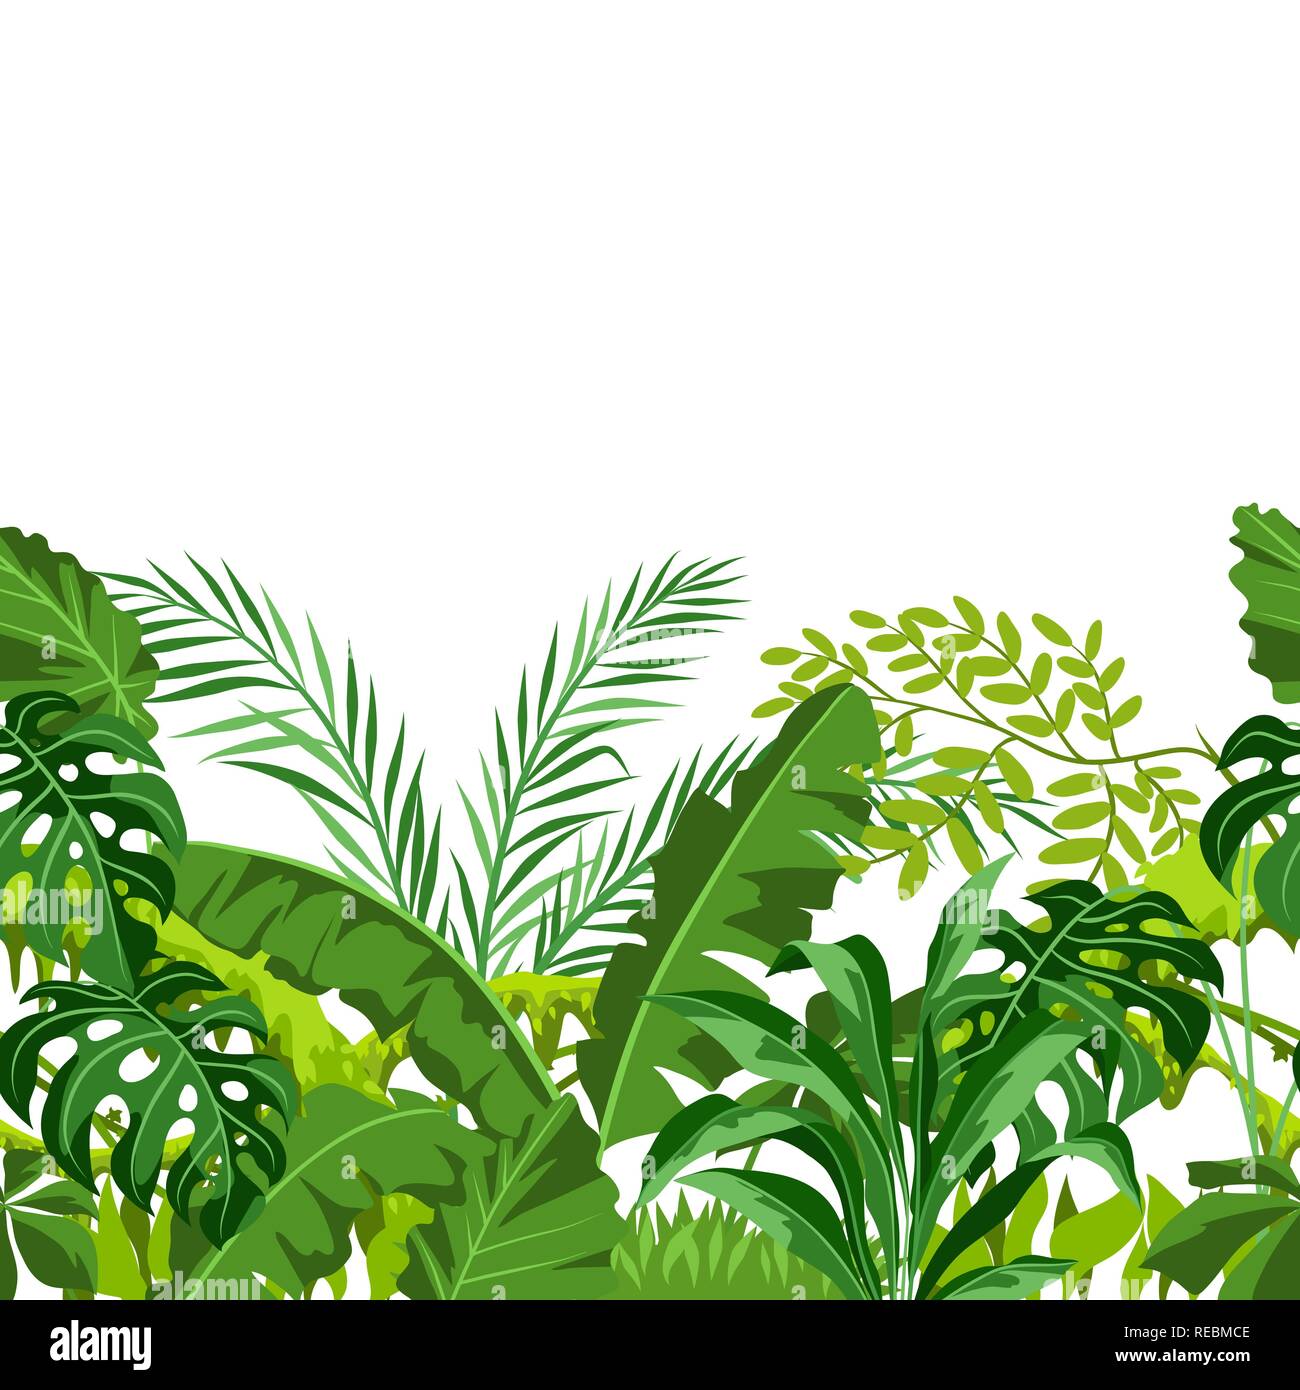 Seamless pattern with jungle plants. Stock Vector